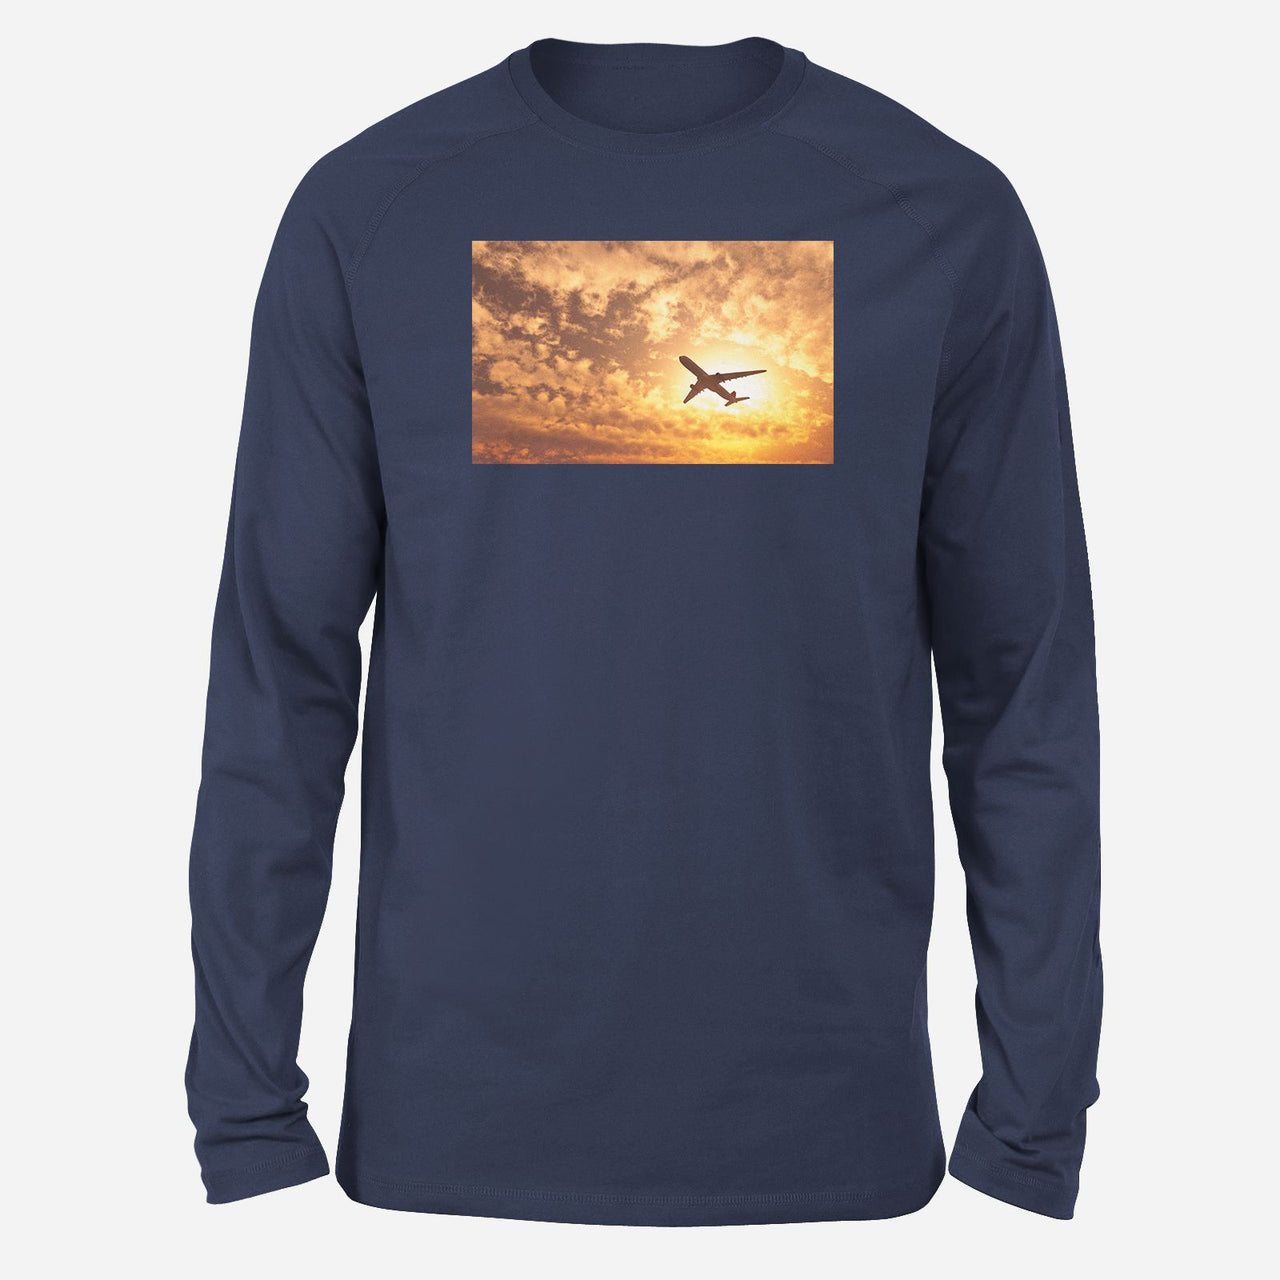 Plane Passing By Designed Long-Sleeve T-Shirts